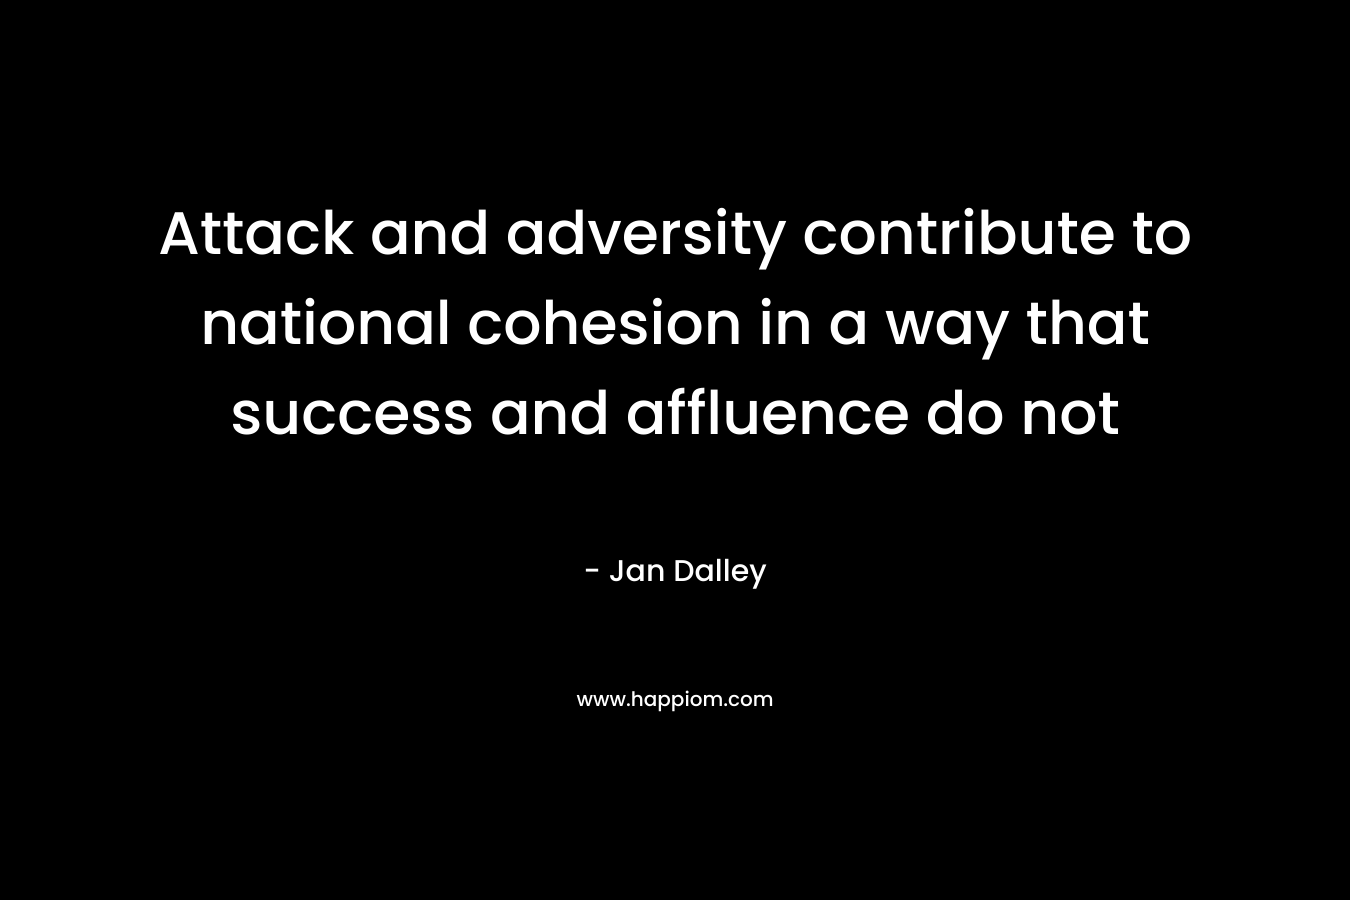 Attack and adversity contribute to national cohesion in a way that success and affluence do not